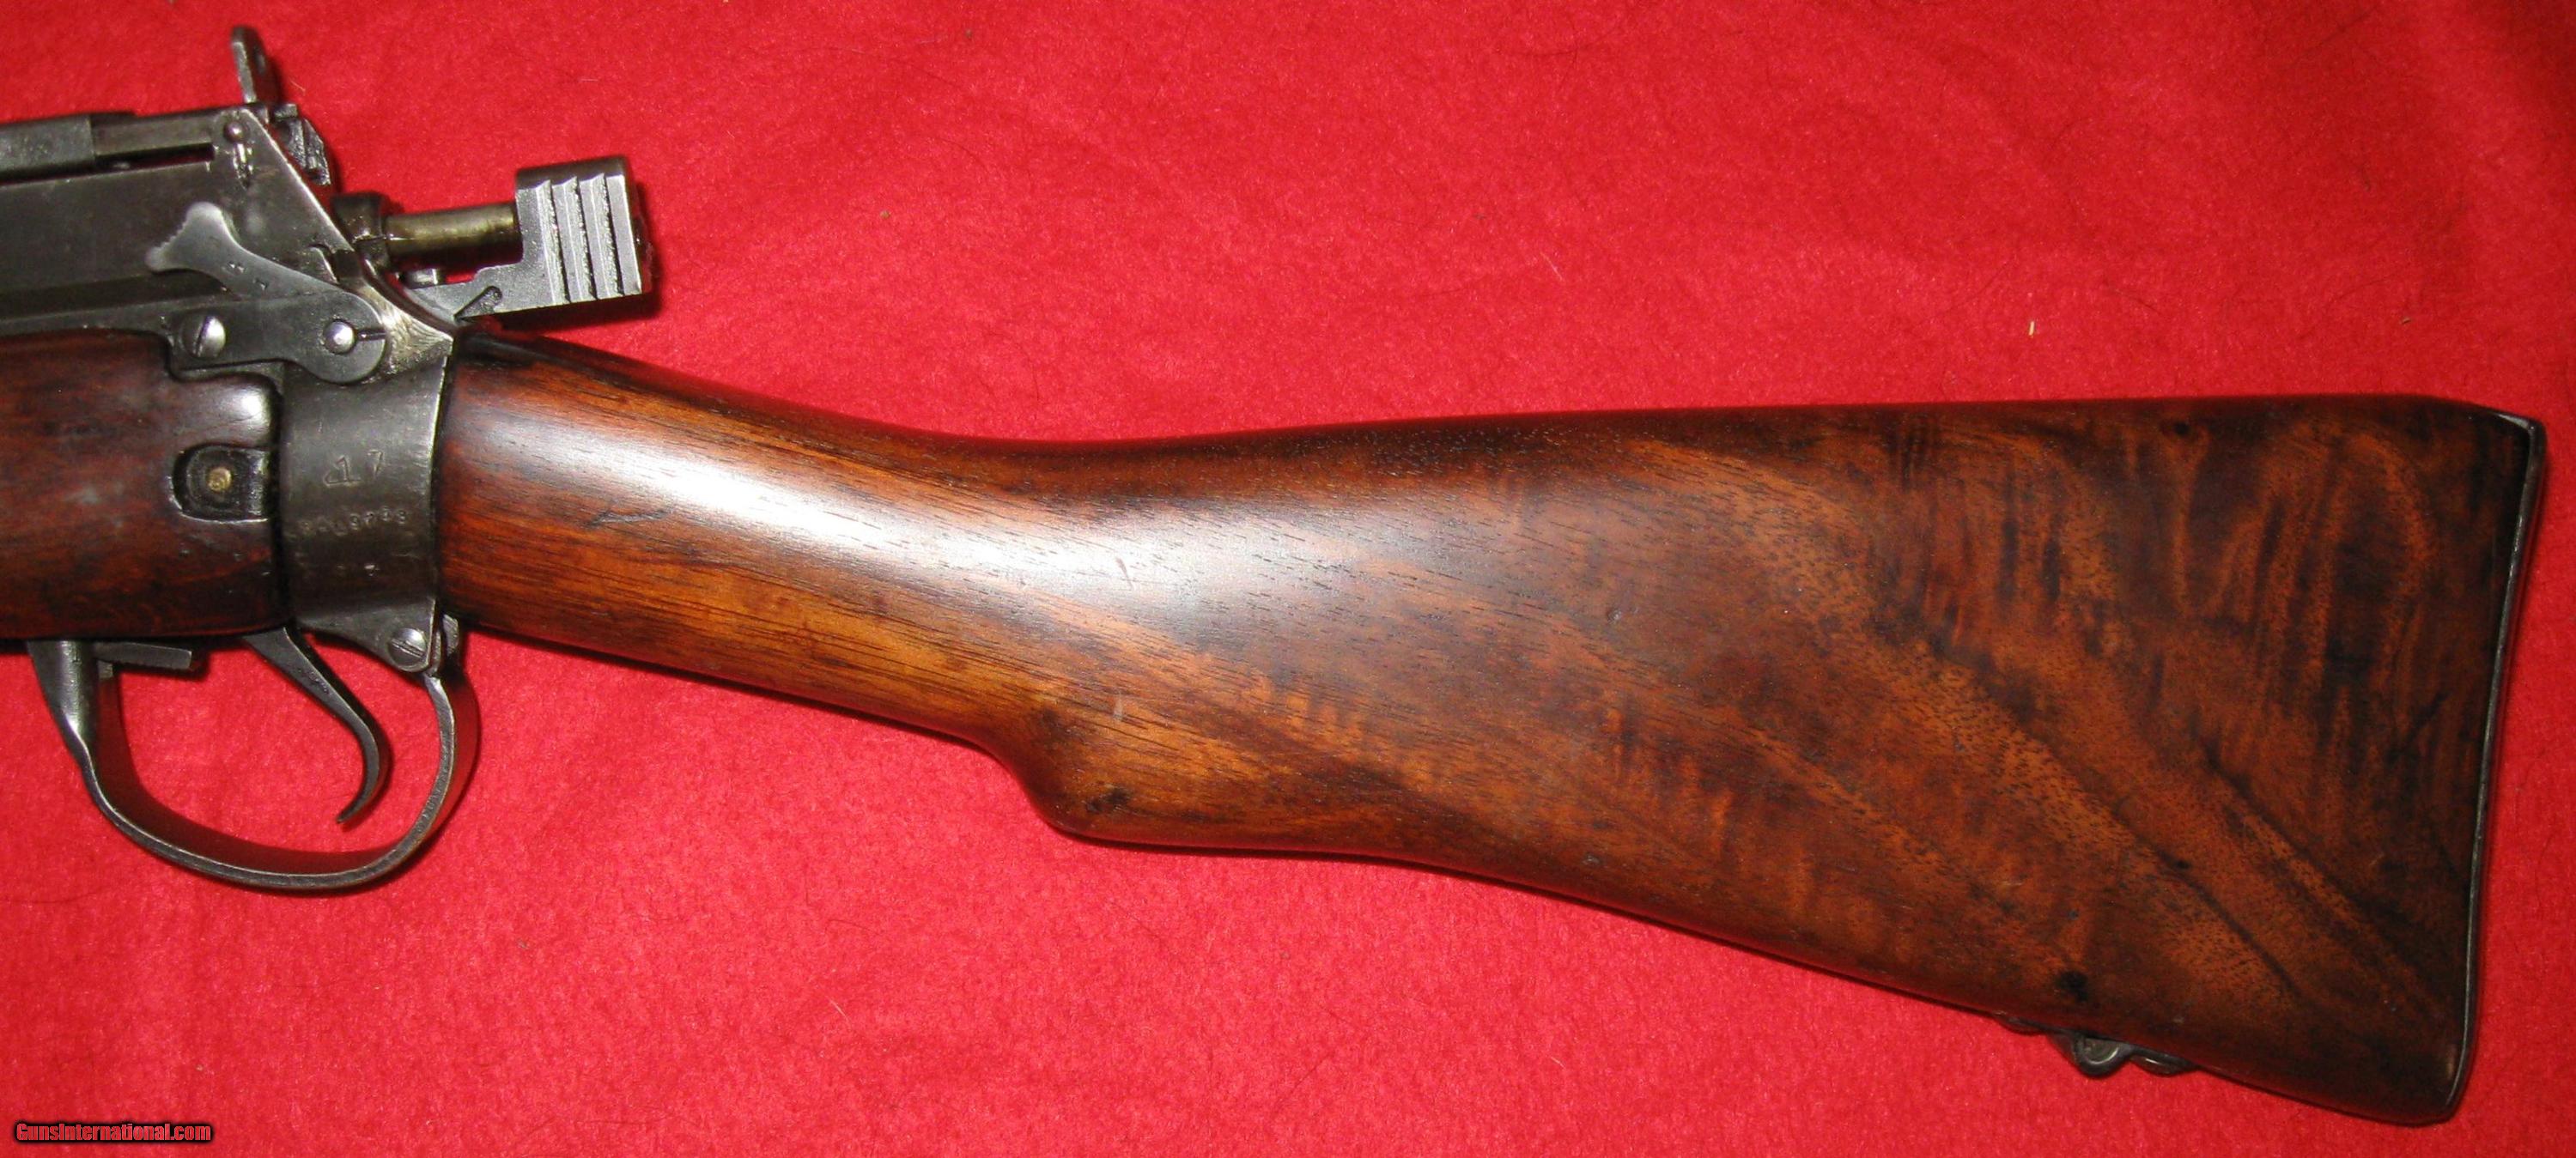 Enfield No 4 MK I Long Branch 1945 for sale at : 987472776